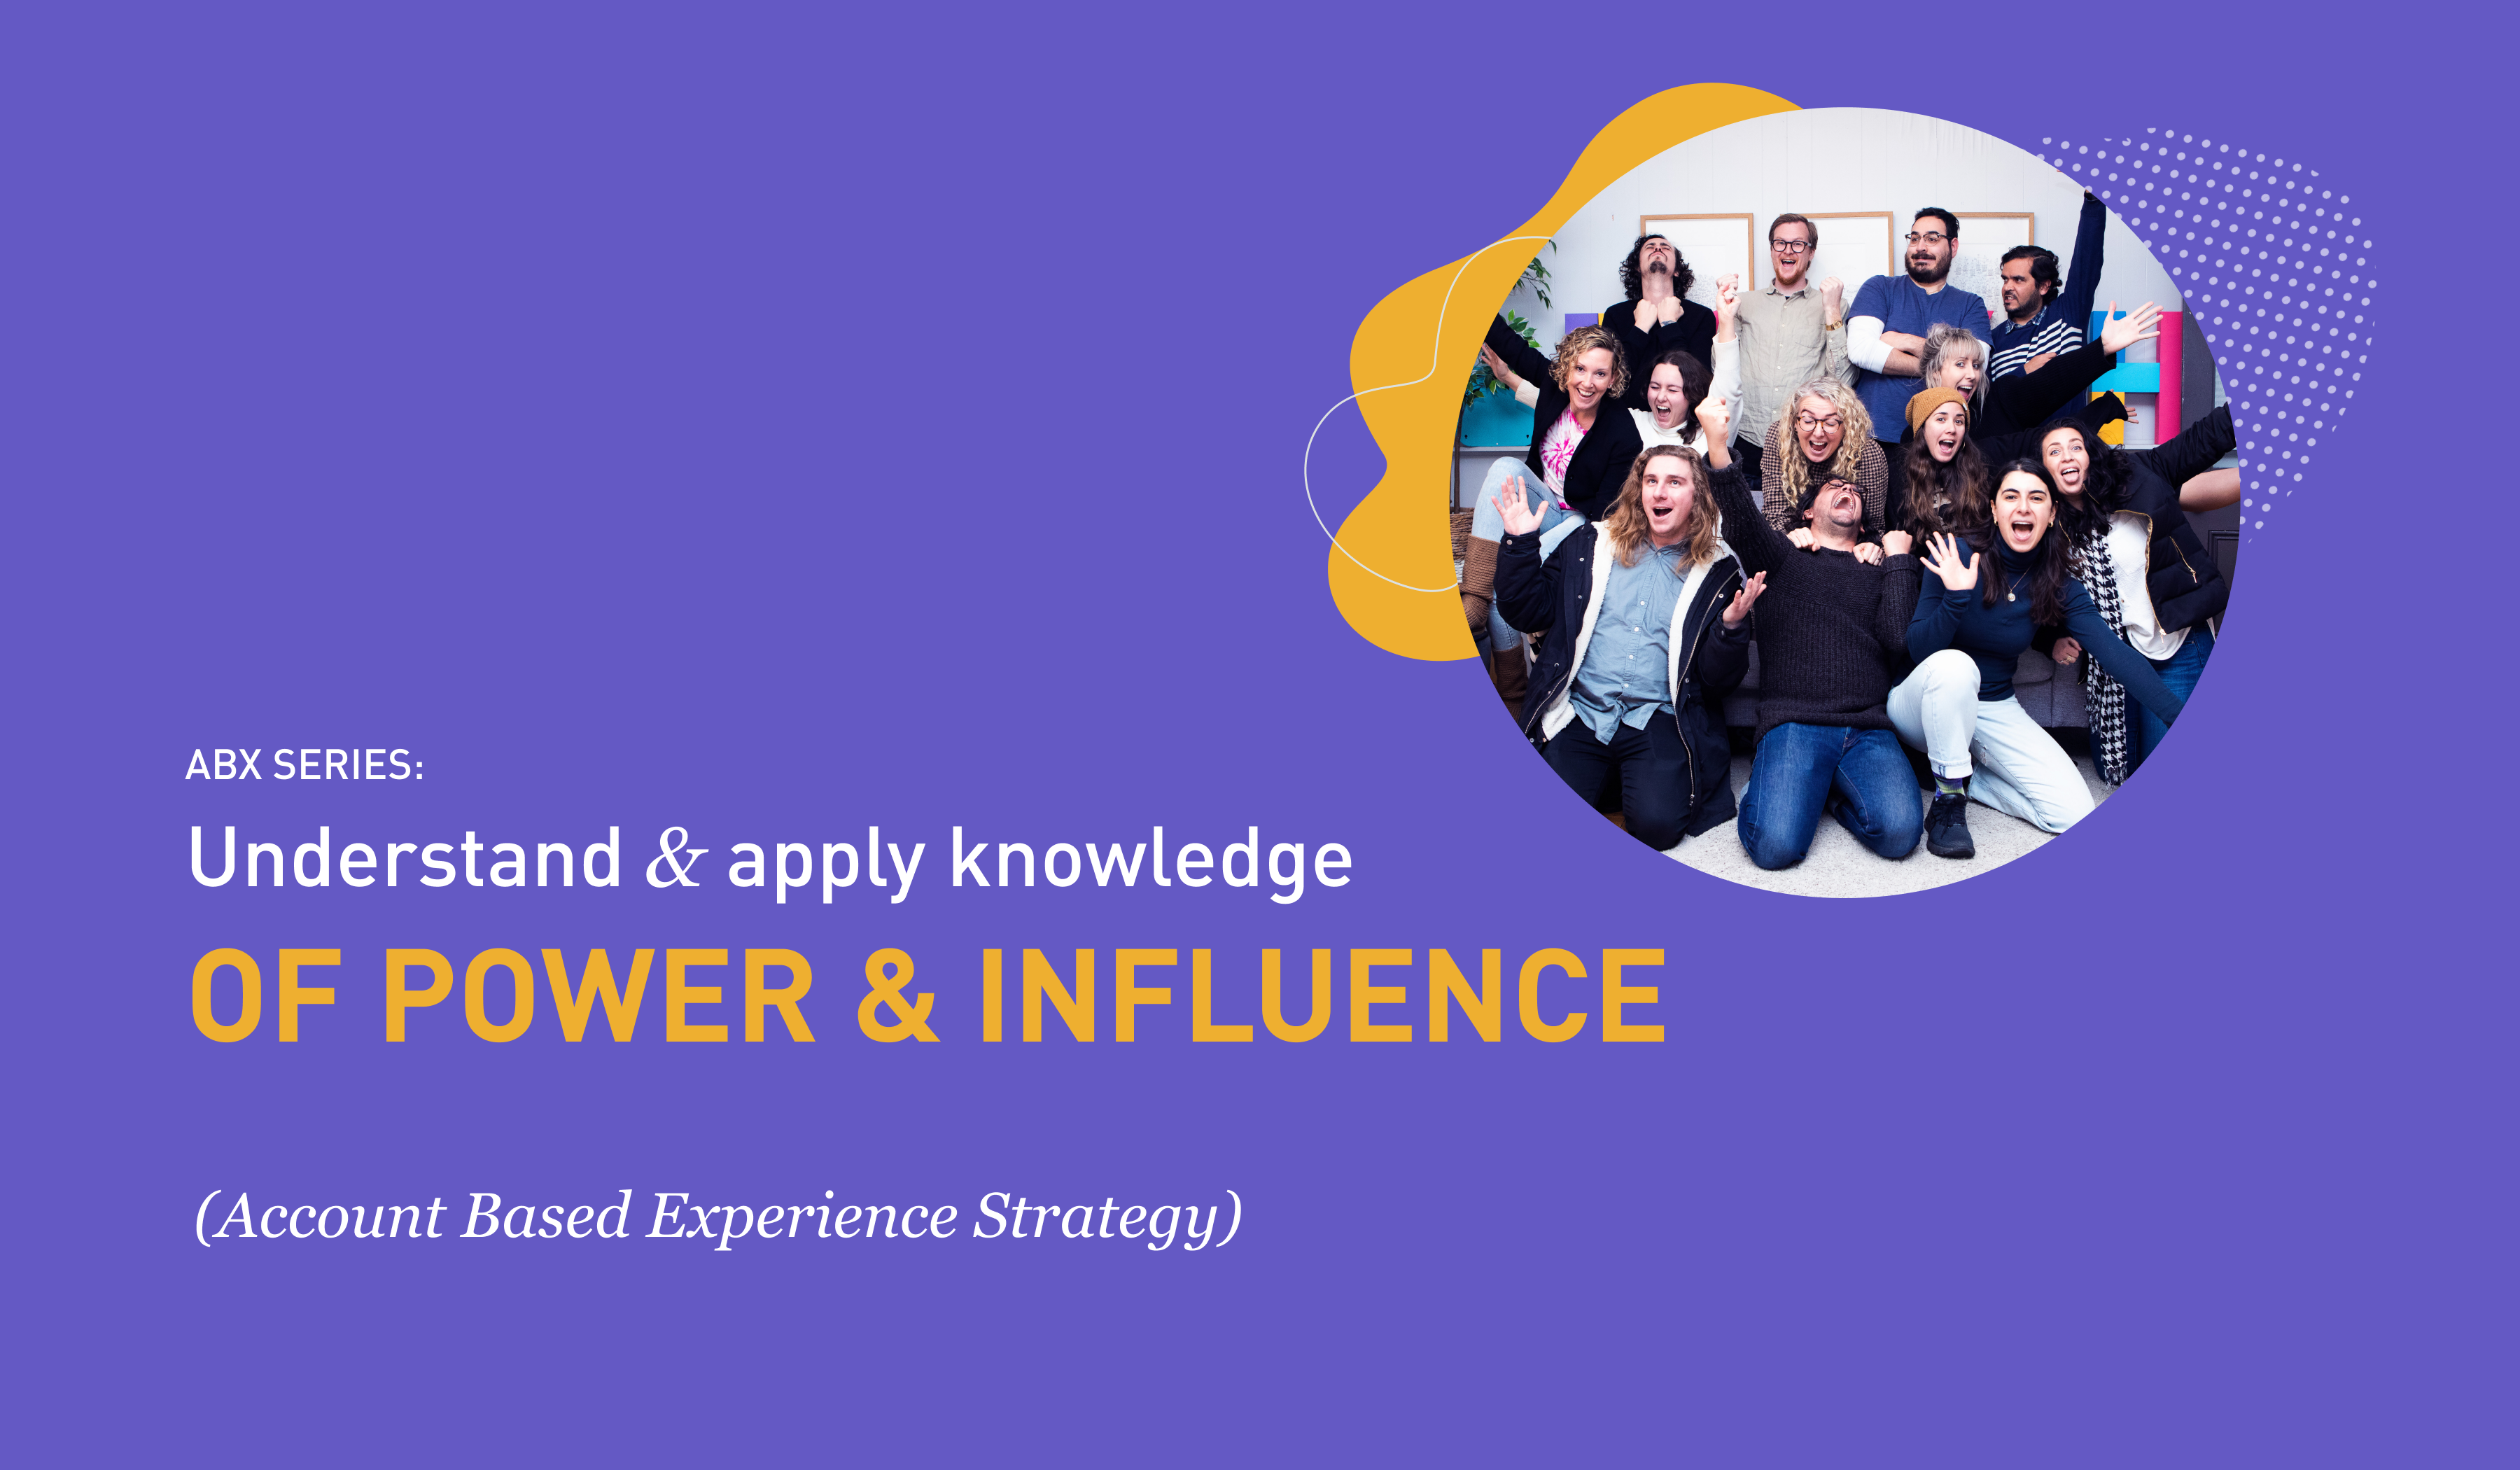 Mapping out Power & Influence in an account based marketing strategy